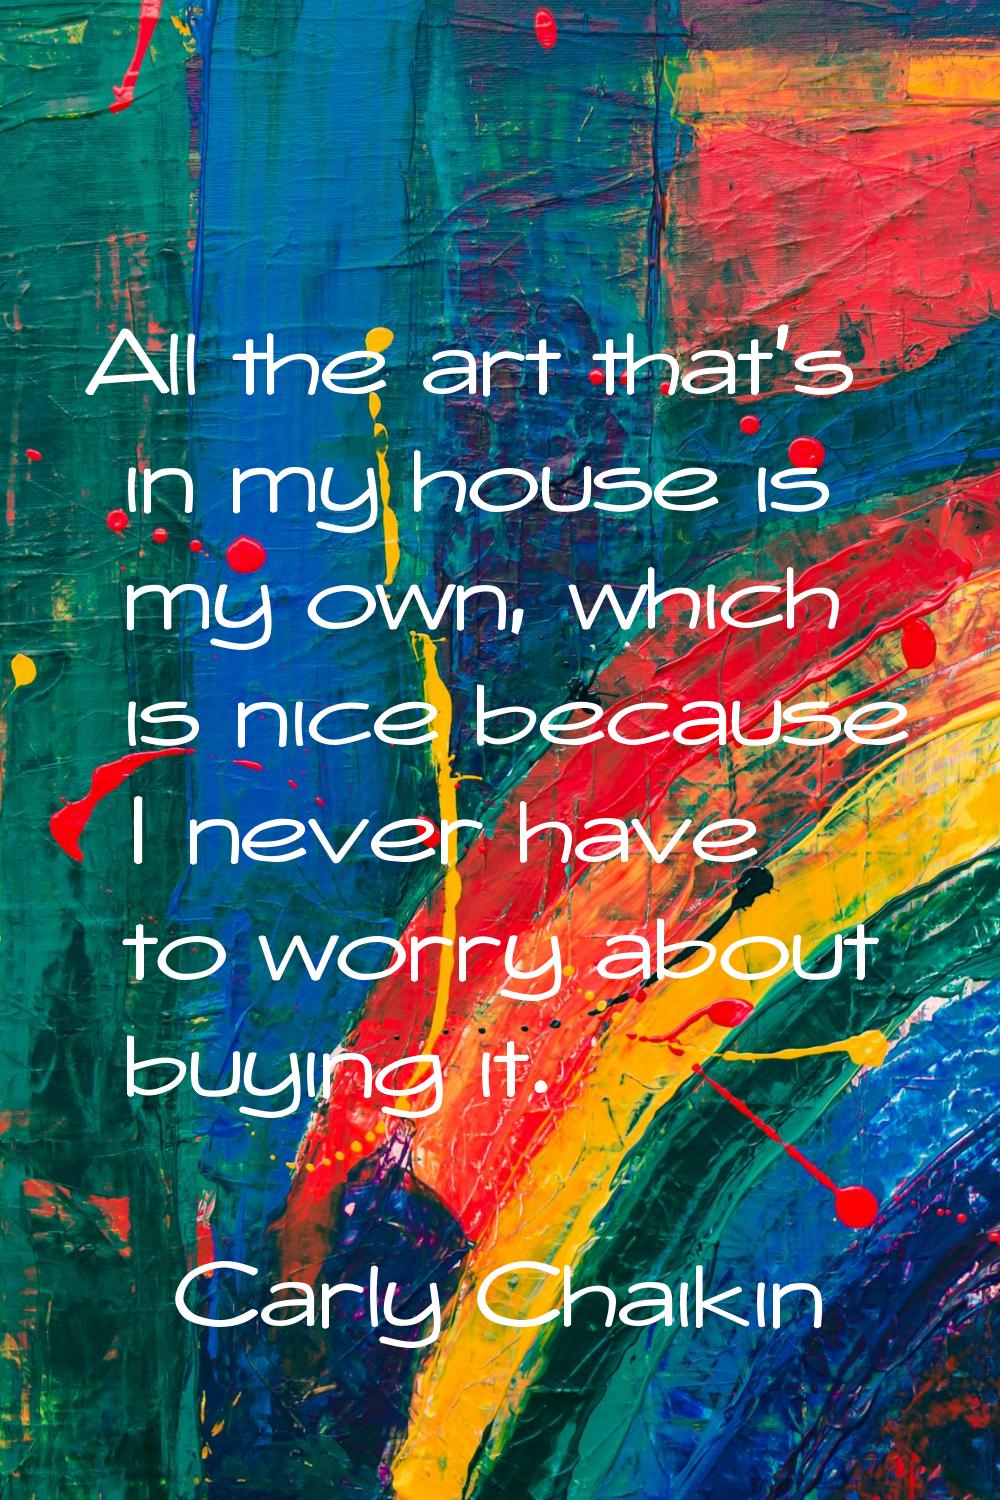 All the art that's in my house is my own, which is nice because I never have to worry about buying 